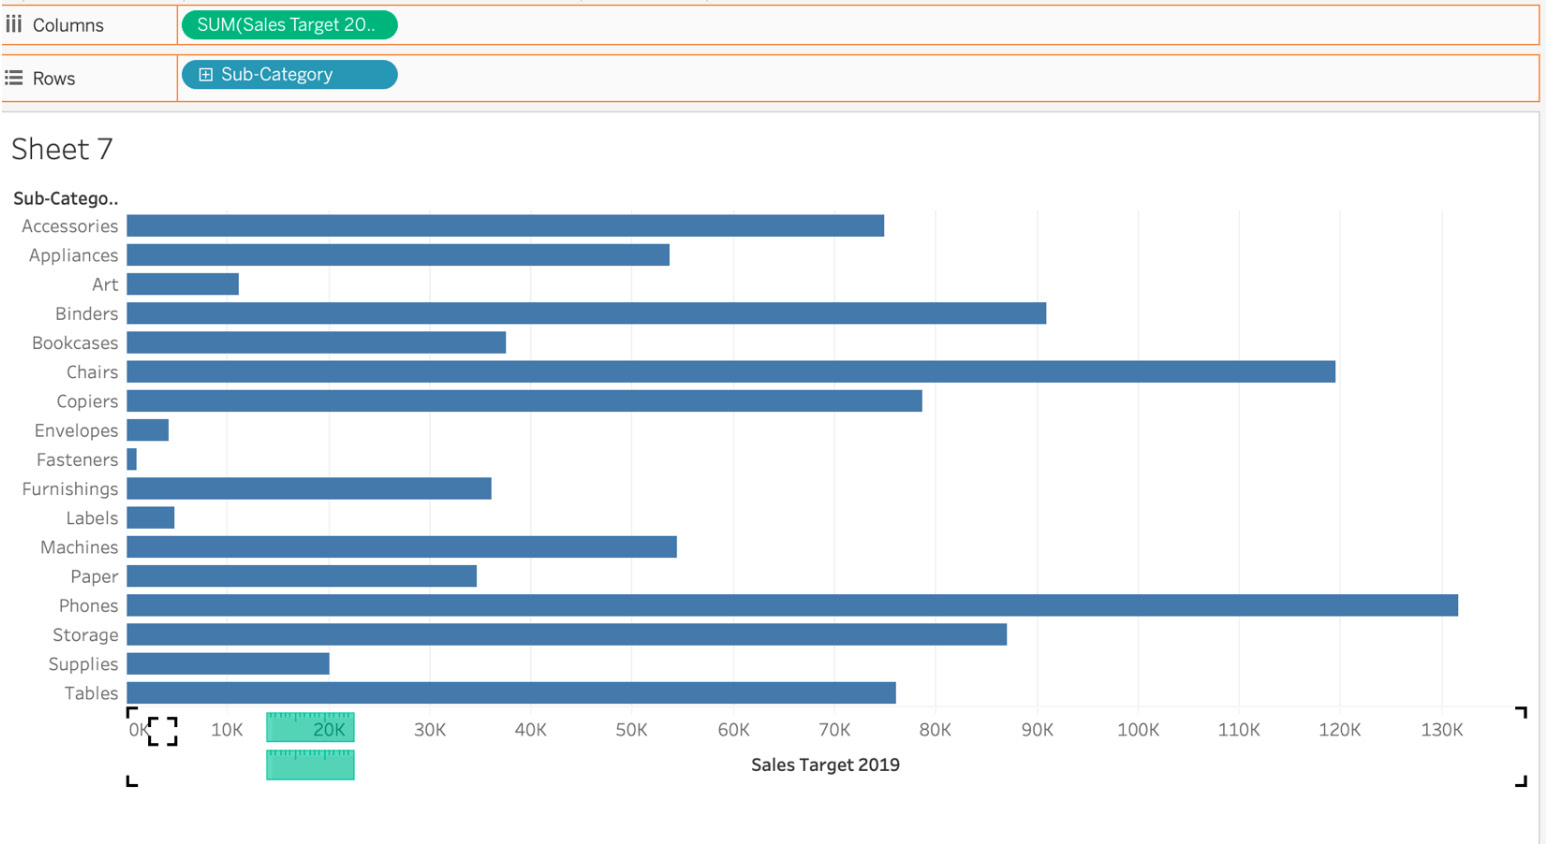 Figure 4.27: Sales by sub-category bar chart 
